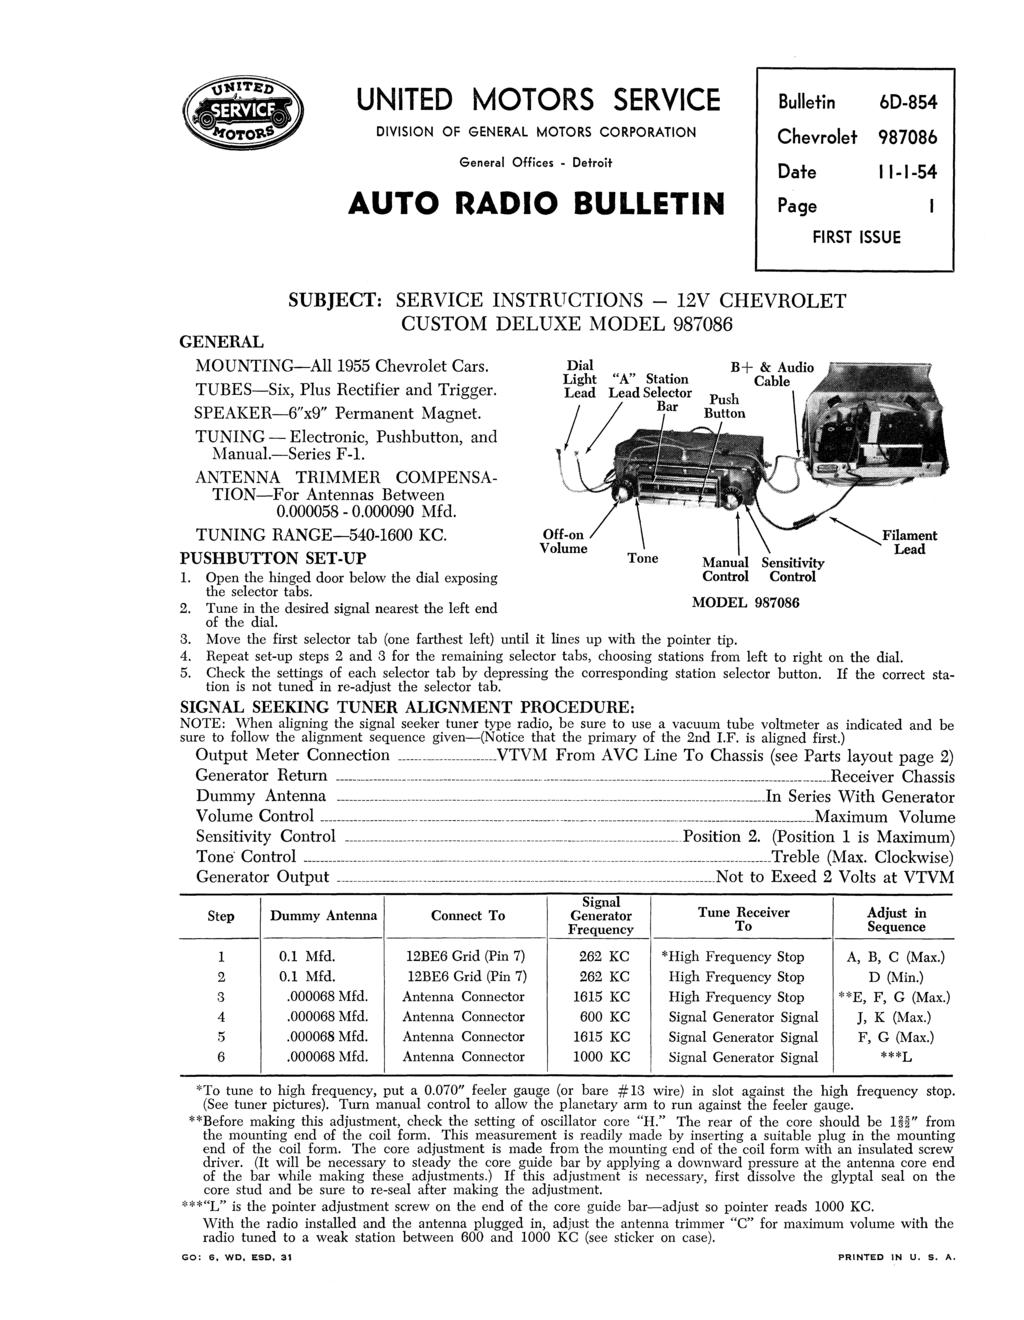 UNITED MOTORS SERVICE DIVISION OF GENERAL MOTORS CORPORATION General Offices - Detroit AUTO RADIO BULLETIN Bulletin 6D-854 Date 11-1-54 Page 1 FIRST ISSUE GENERAL SUBJECT: SERVICE INSTRUCTIONS - 12V